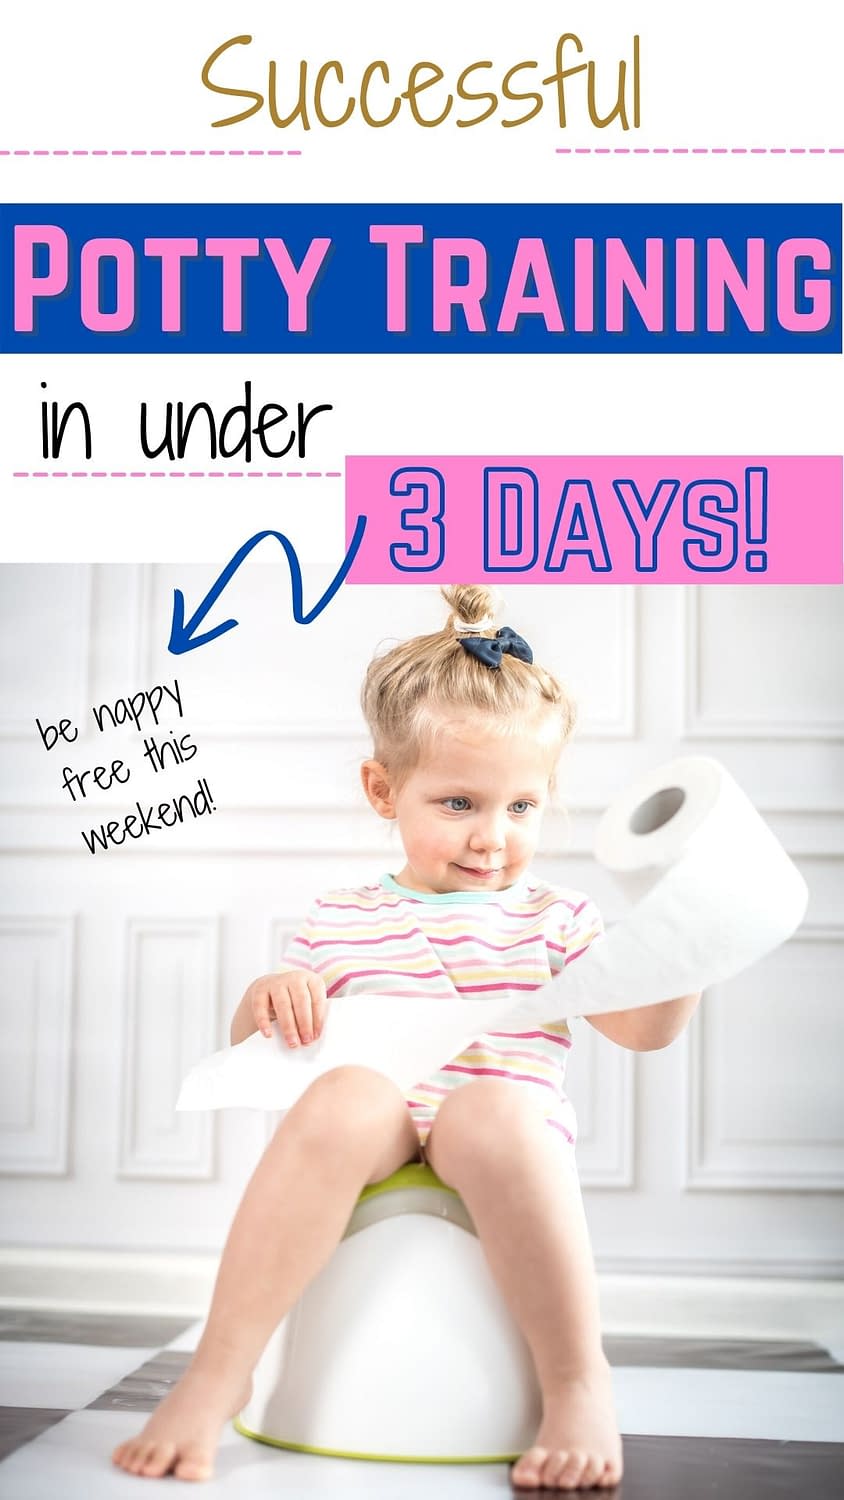 Want to potty train your toddler quickly? Avoid making common potty training mistakes and find out how to successfully potty train your toddler in less than 3 days!